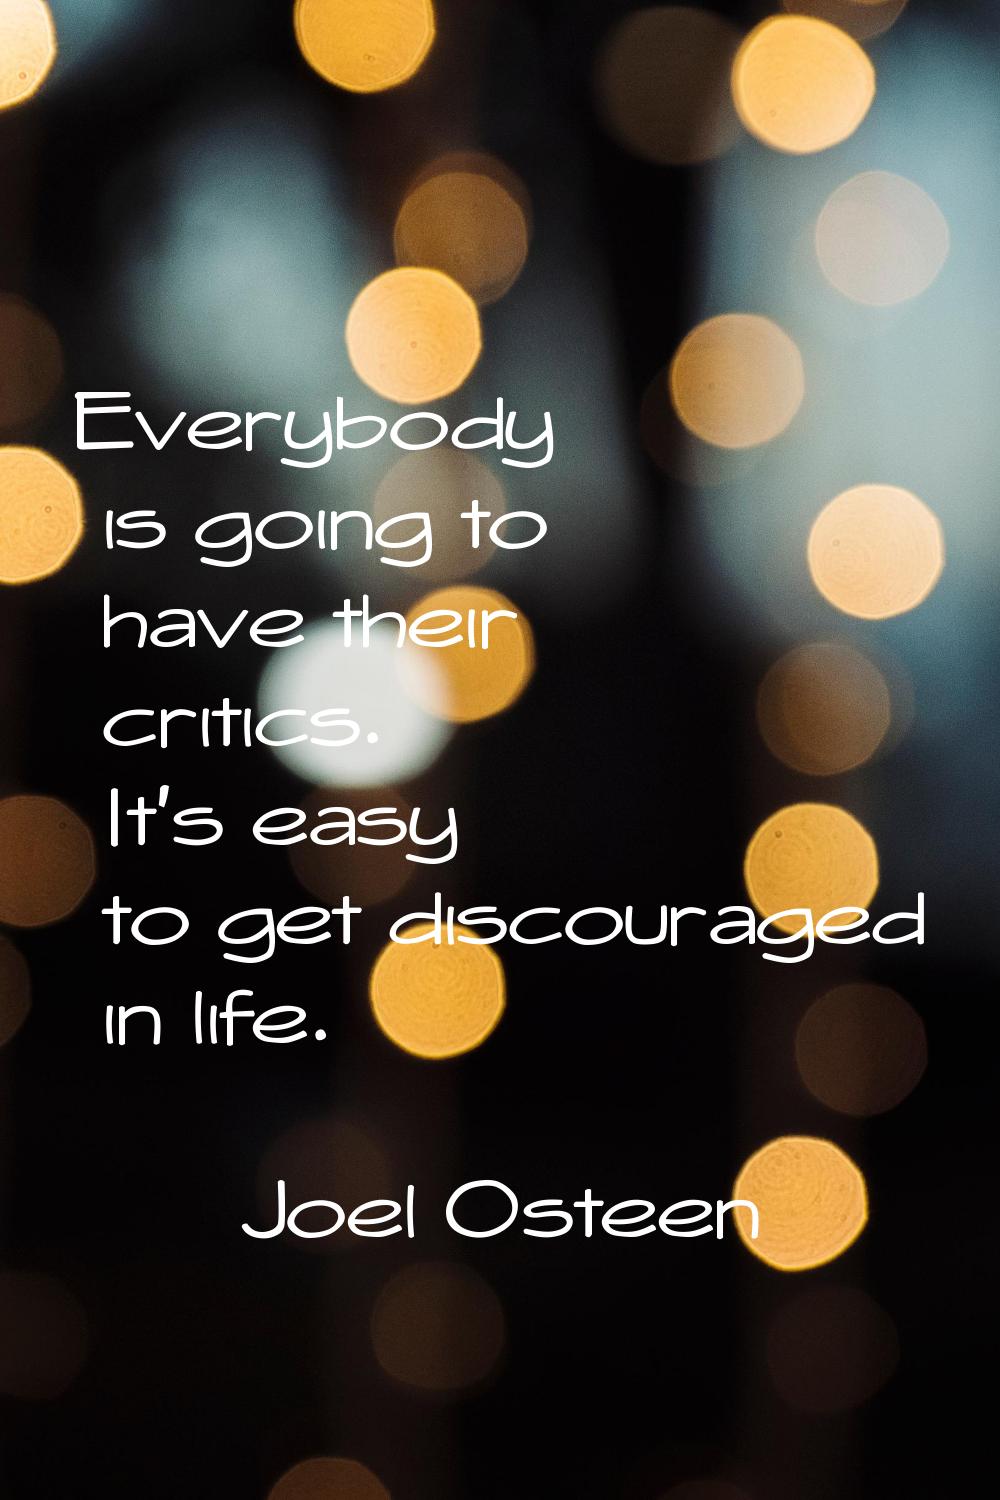 Everybody is going to have their critics. It's easy to get discouraged in life.